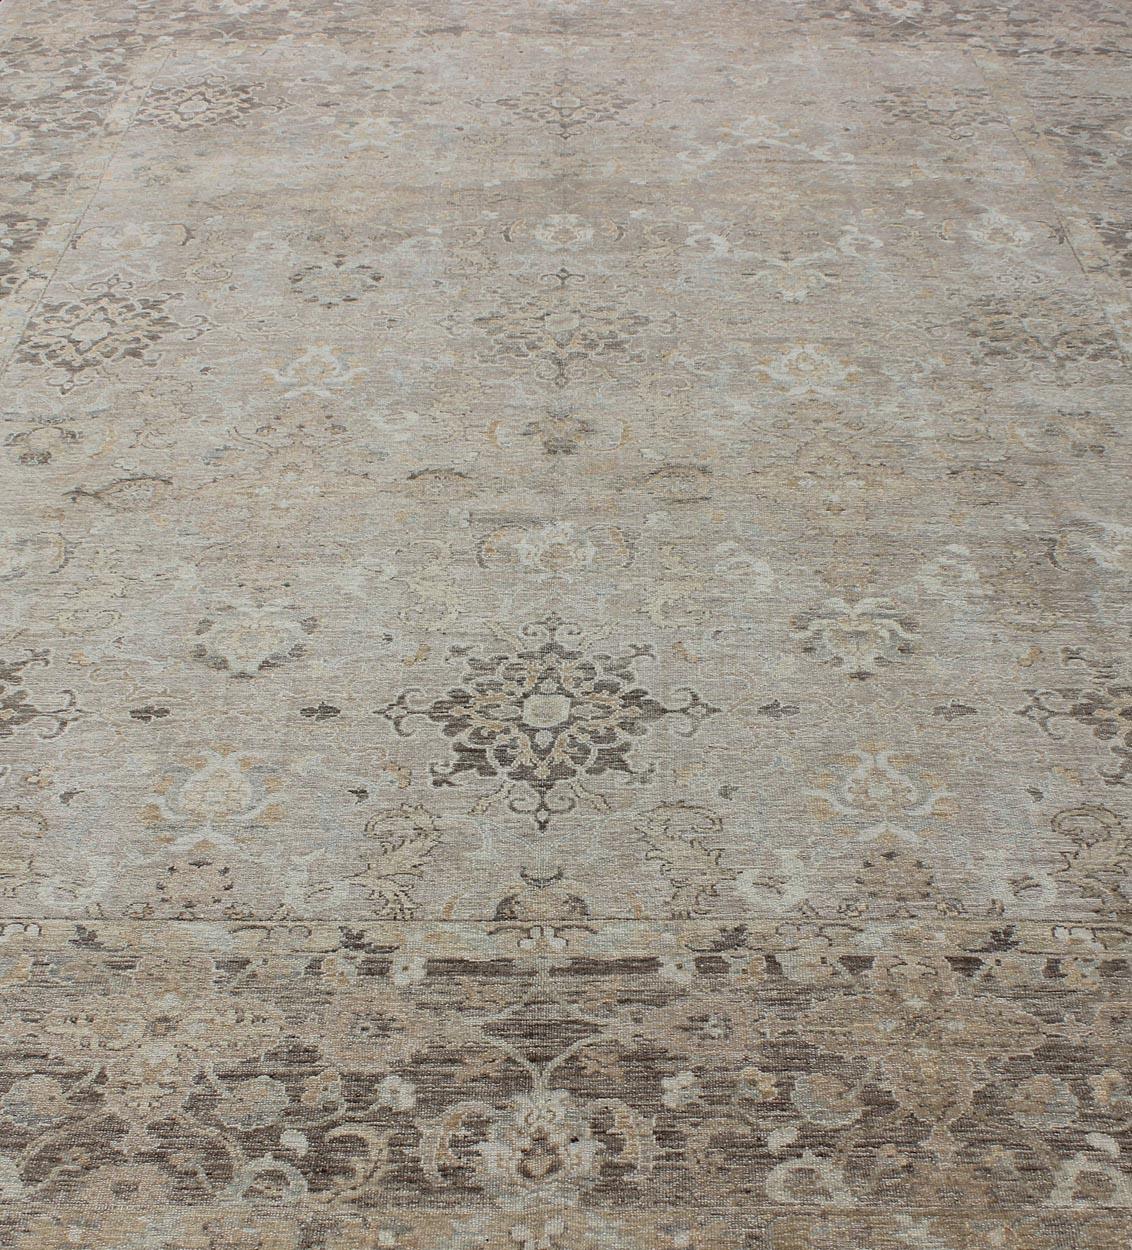 Turkish Sivas Fine Weave Rug in Taupe, Gray, Ivory and Brown and Cream Colors In Good Condition For Sale In Atlanta, GA